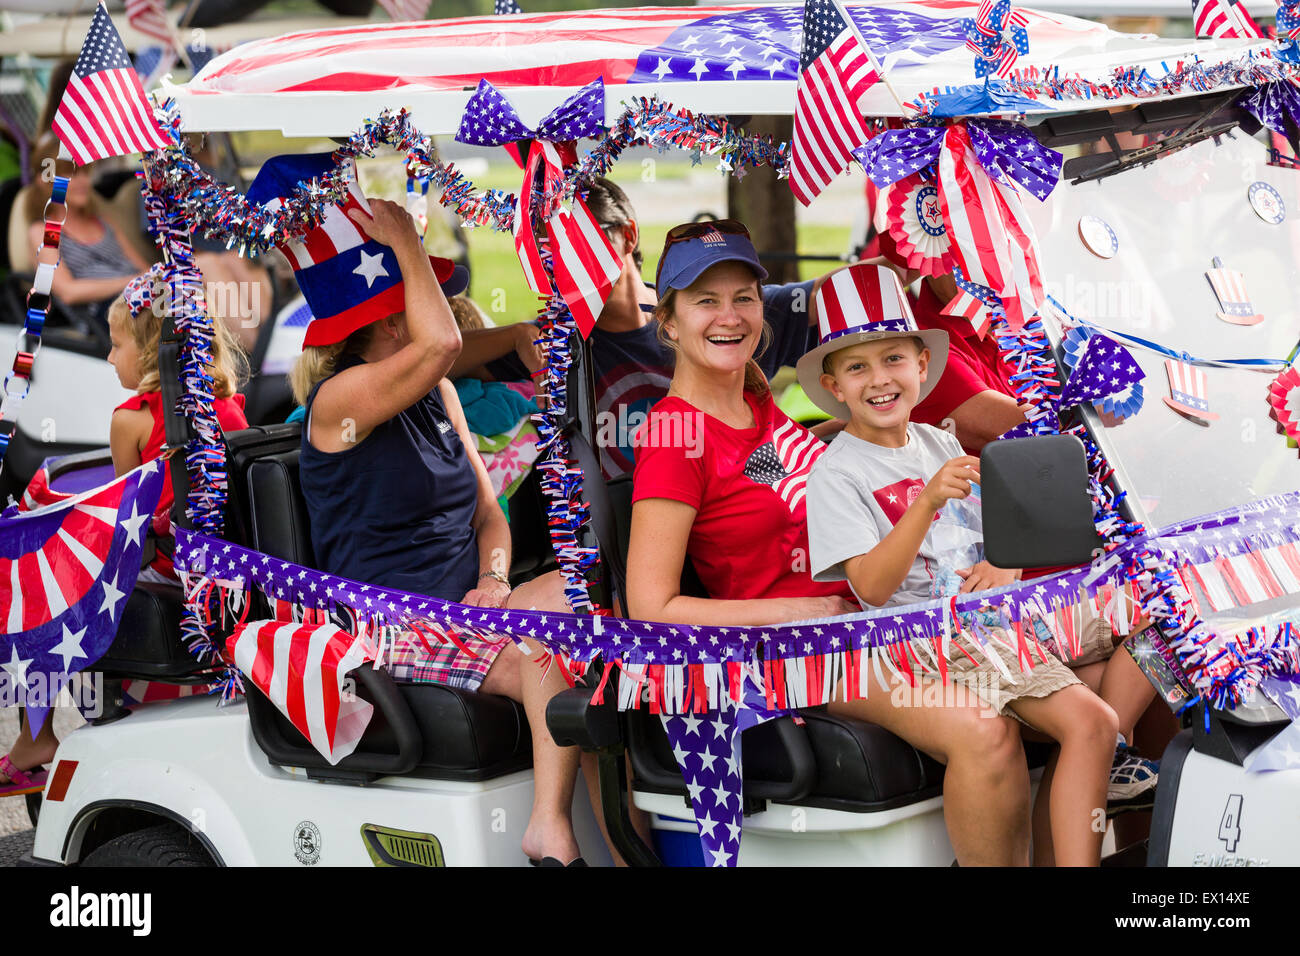 A family rides in their golf cart decorated with bunting and American flags during the Daniel Island Independence Day parade July 3, 2015 in Charleston, South Carolina. Stock Photo